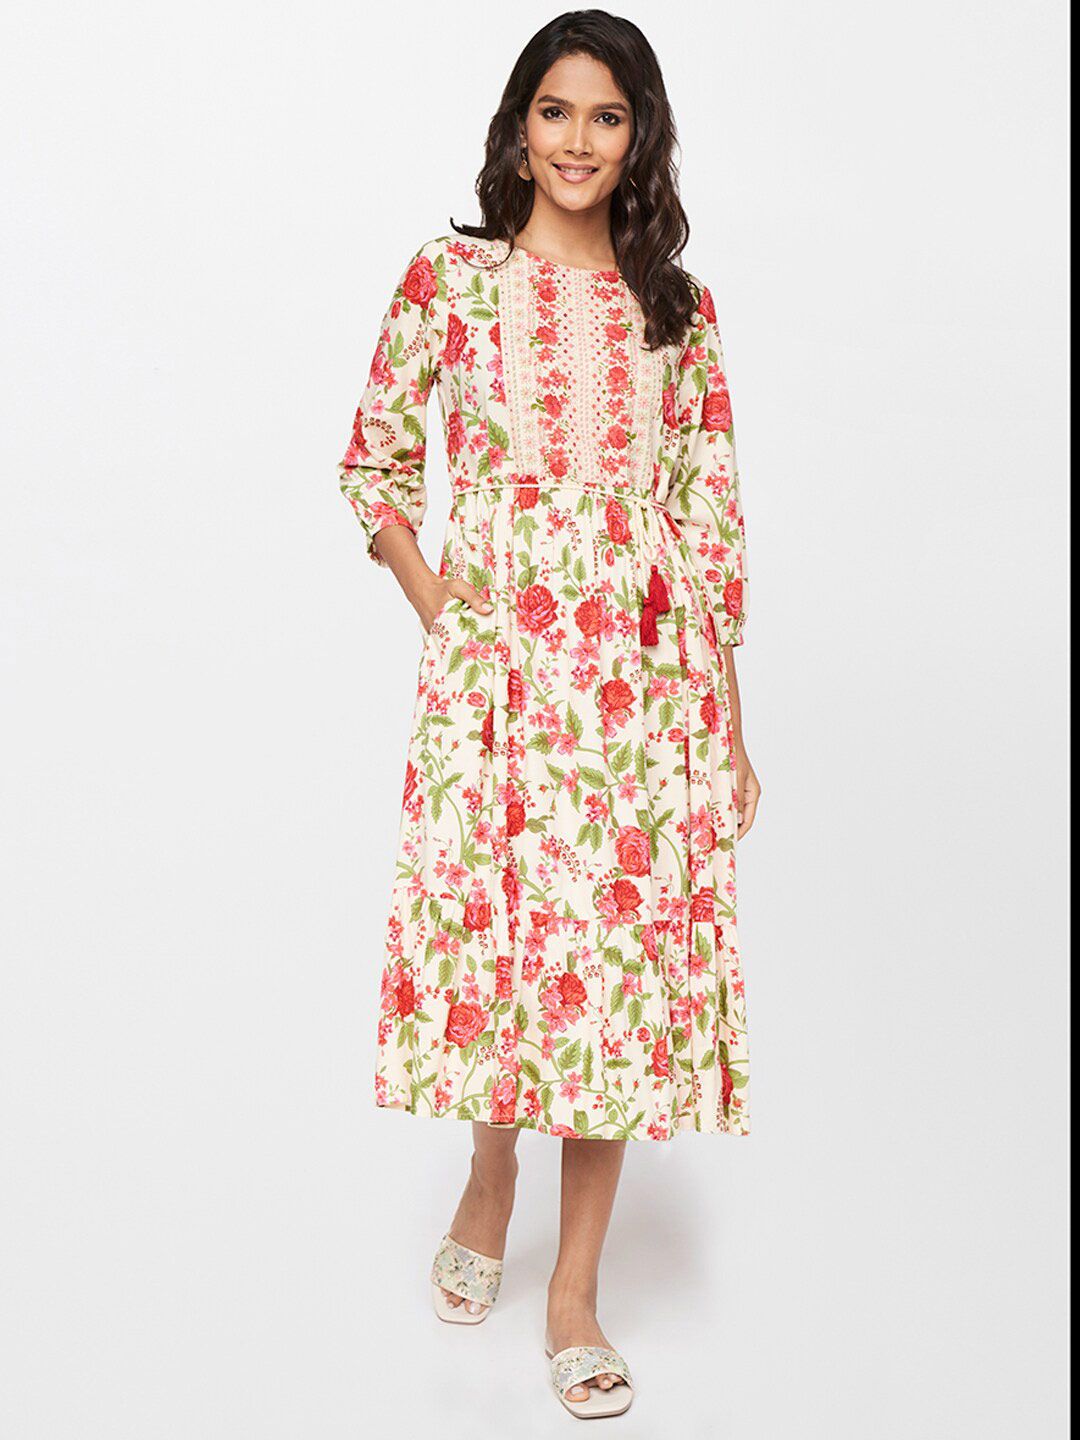 itse Off White Floral A-Line Dress Price in India